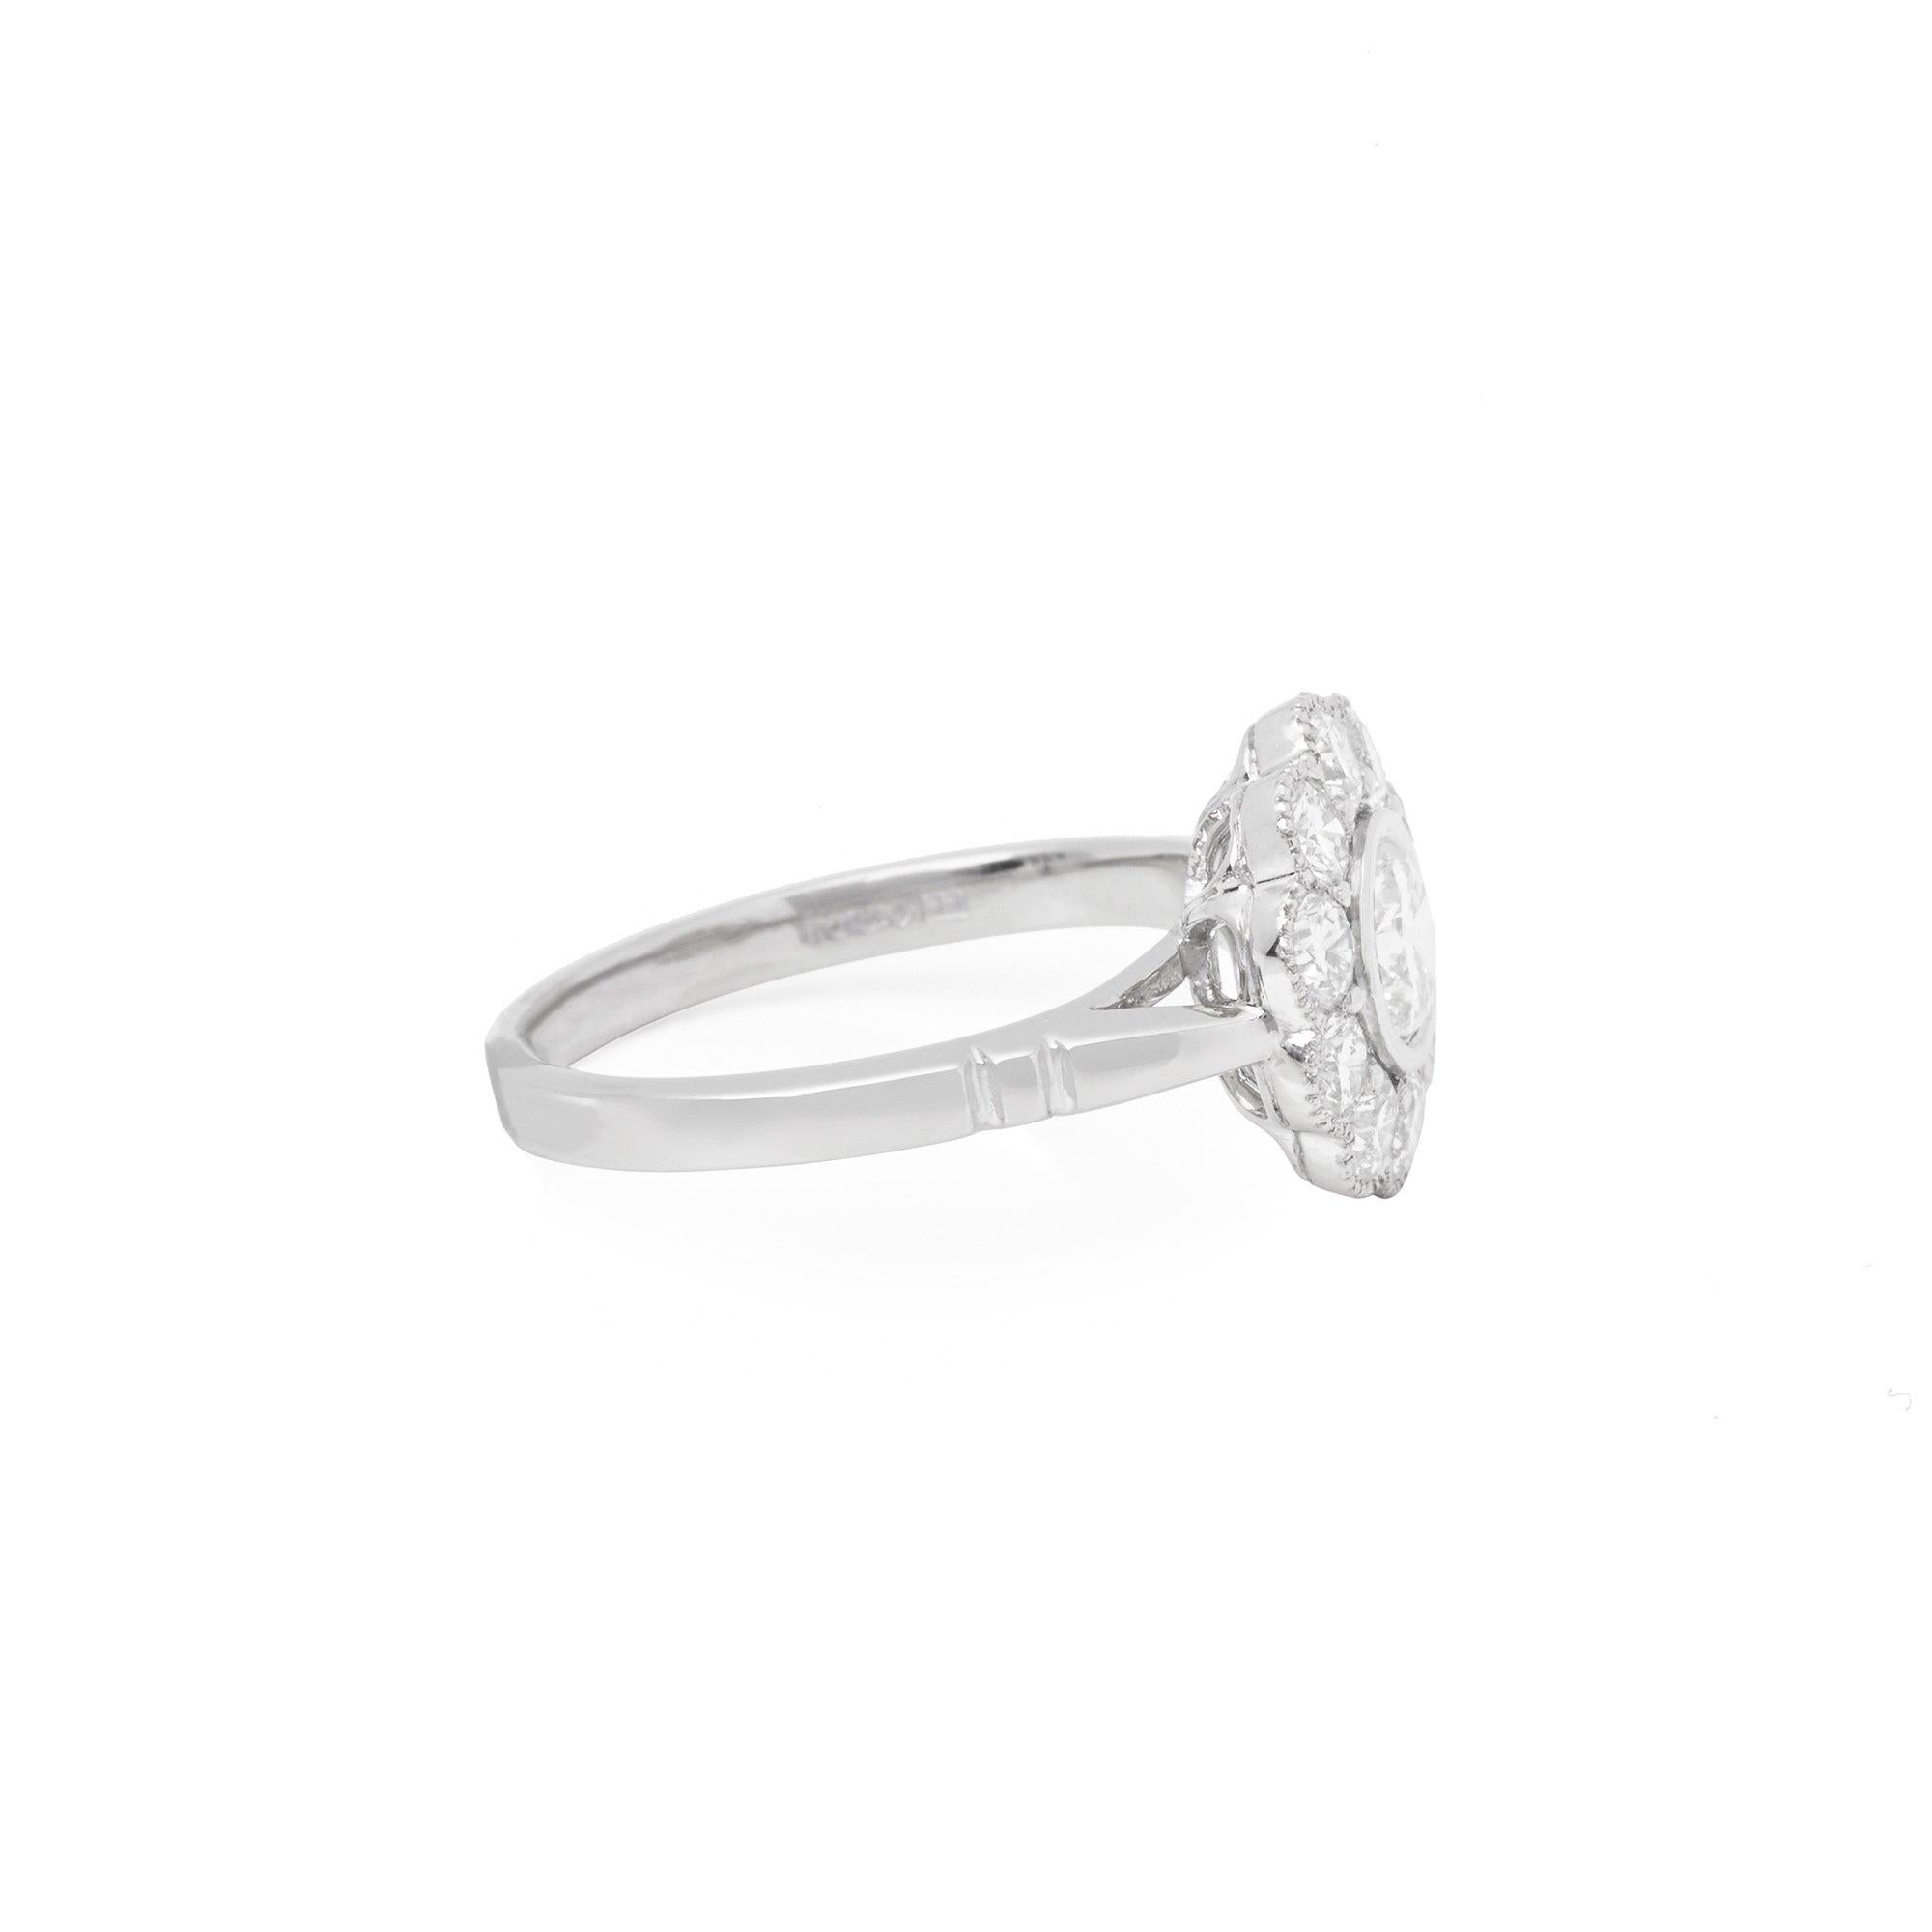 This Ring features a single Round Briliant Cut Diamond totalling 0.50cts with Millgrain Set Round Brilliant Cut Diamonds totaling 0.89cts. Set in Platinum. Ring size UK L1/2, EU Size 52, USA Size 6. Complete with Xupes Presentation Box. Our Xupes